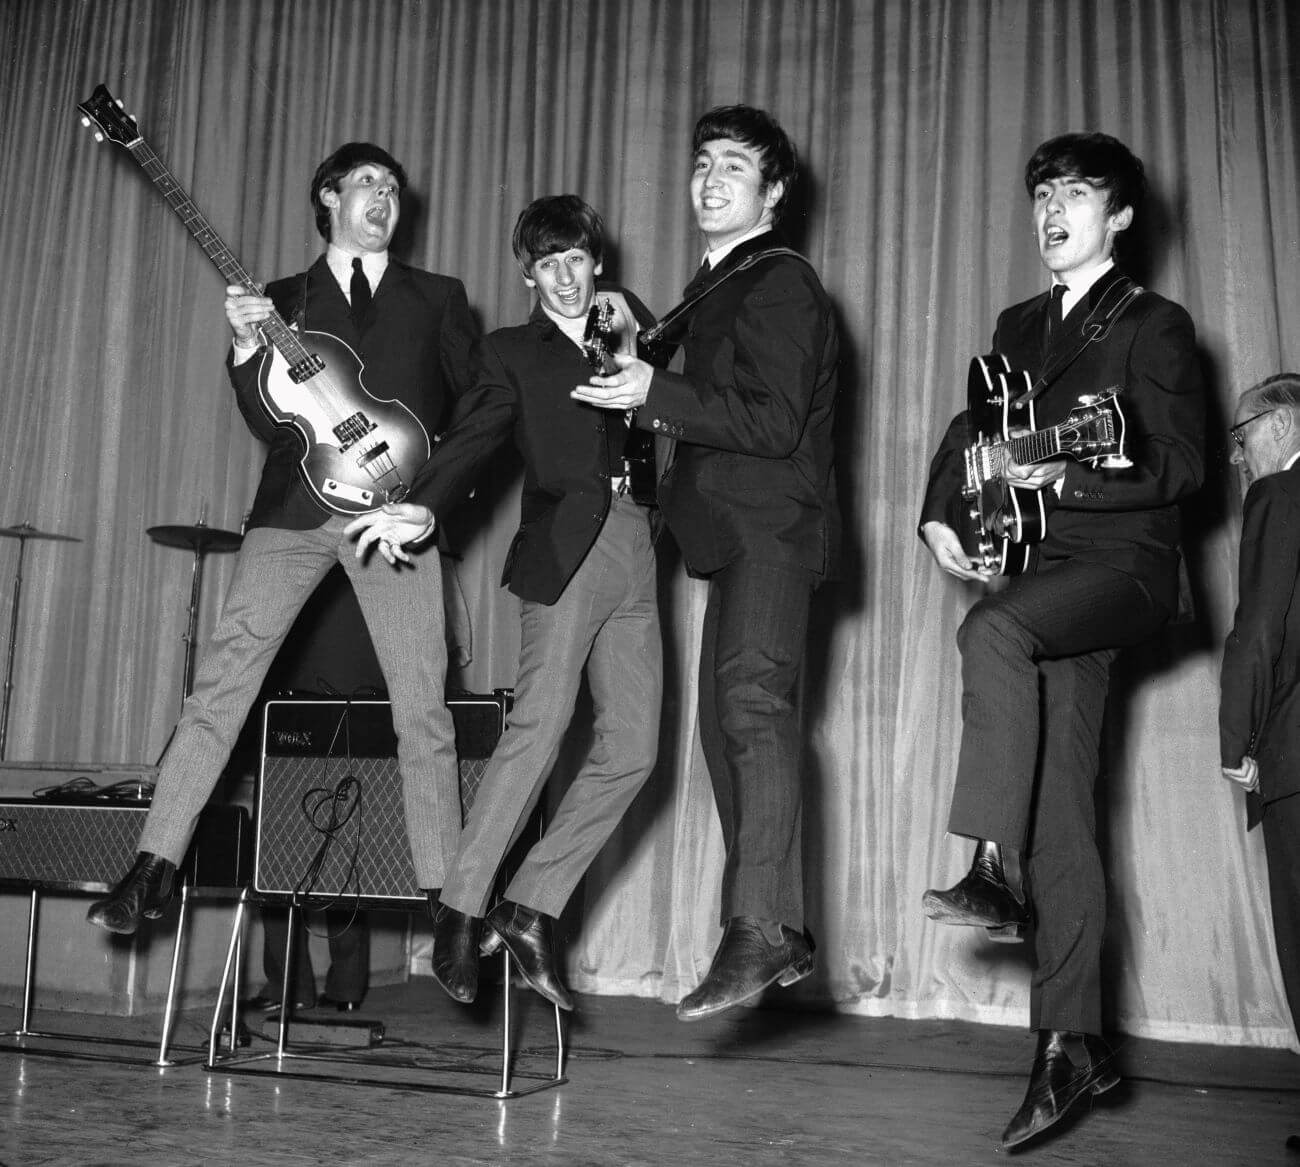 A black and white picture of Paul McCartney, Ringo Starr, John Lennon, and George Harrison jumping up in their air while on a stage. McCartney, Lennon, and  Harrison hold guitars.